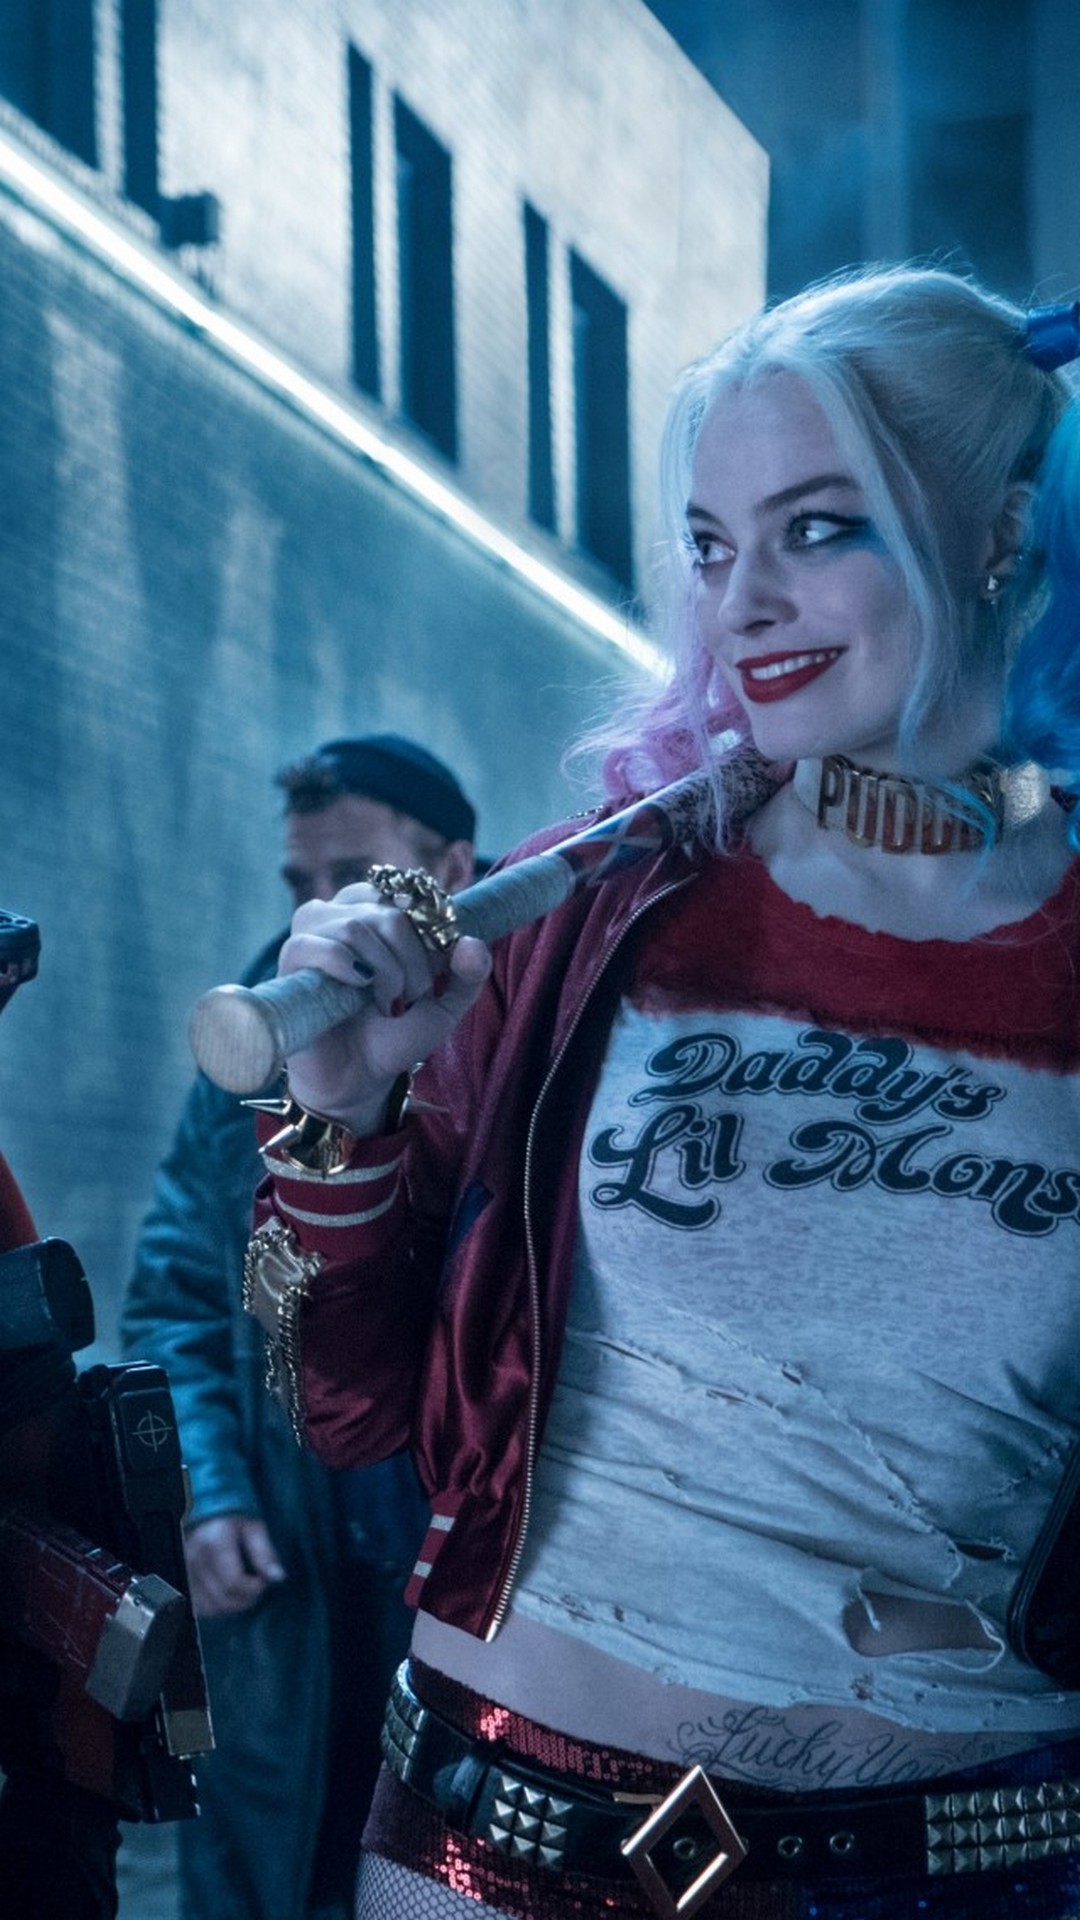 Harley Quinn Android Wallpaper with image resolution 1080x1920 pixel. You can make this wallpaper for your Android backgrounds, Tablet, Smartphones Screensavers and Mobile Phone Lock Screen